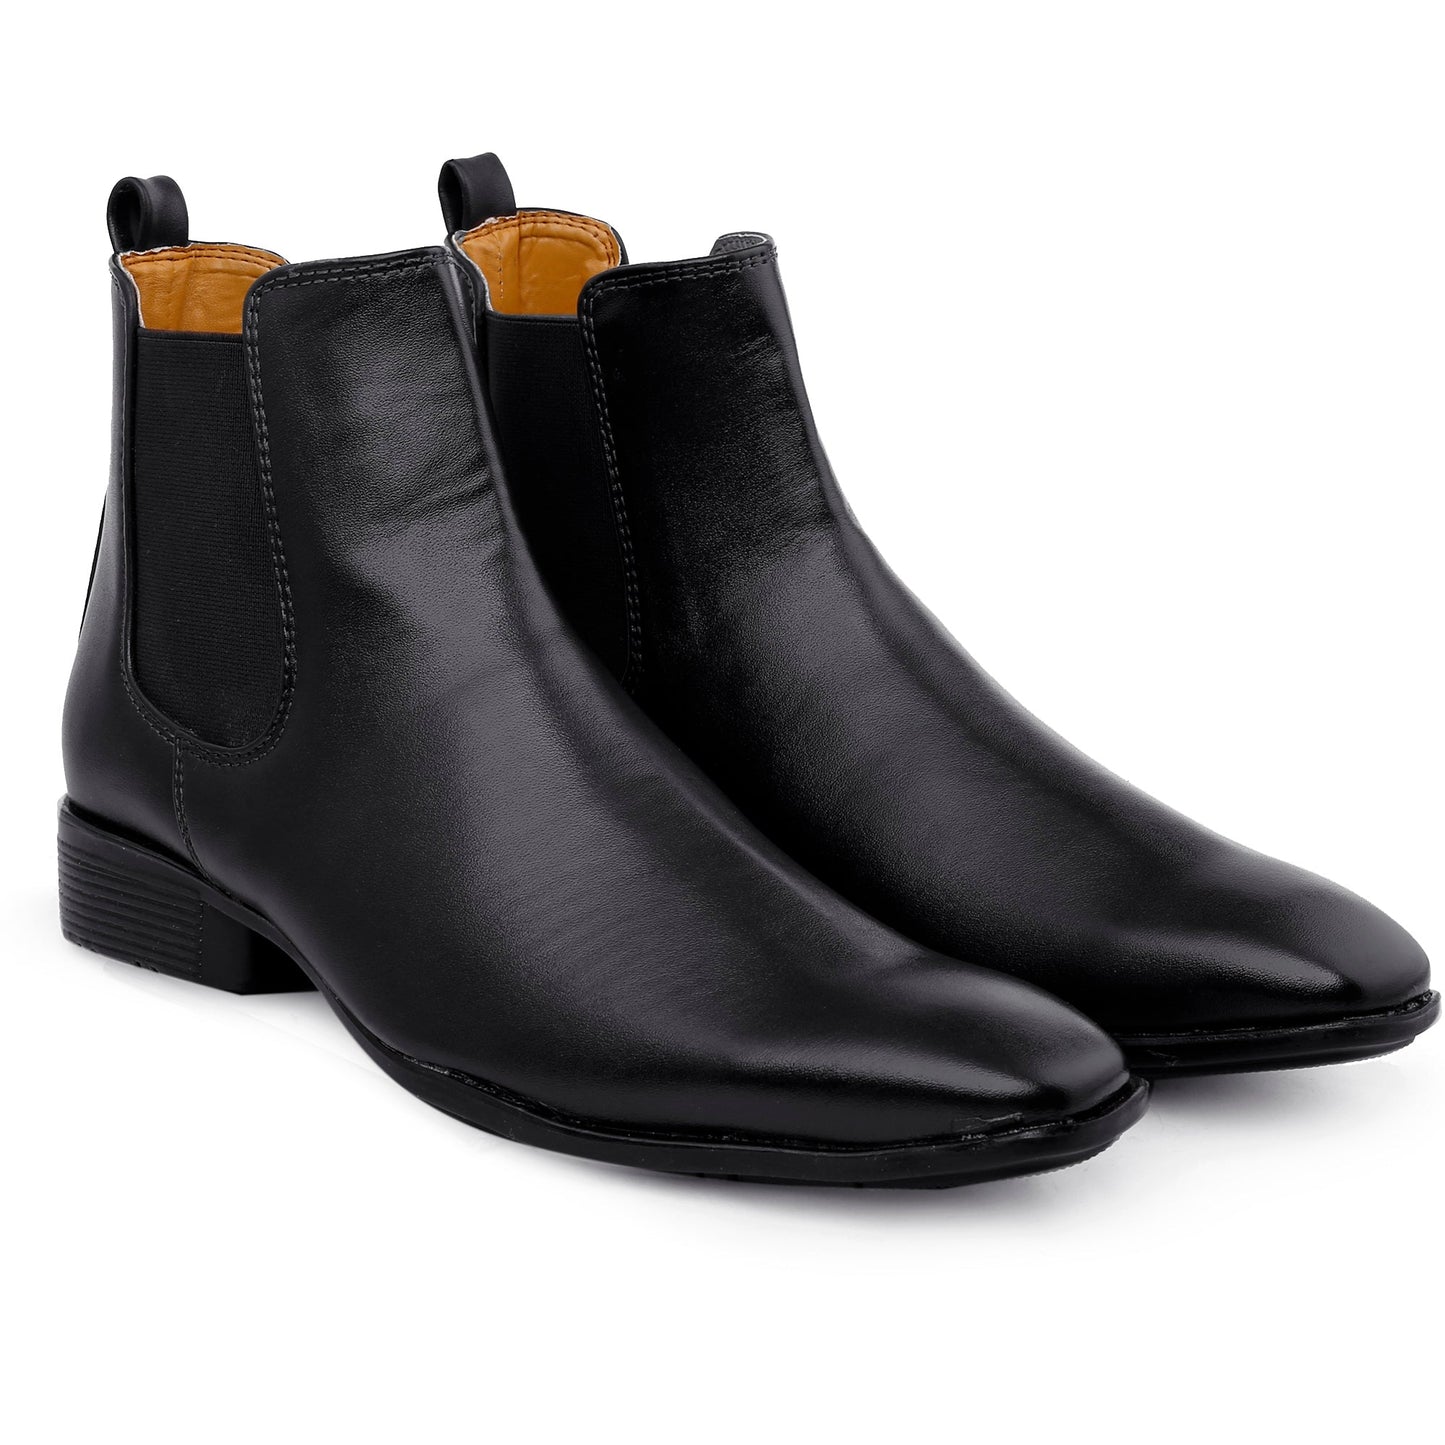 Bxxy Men's High-end Fashionable Chelsea Boots